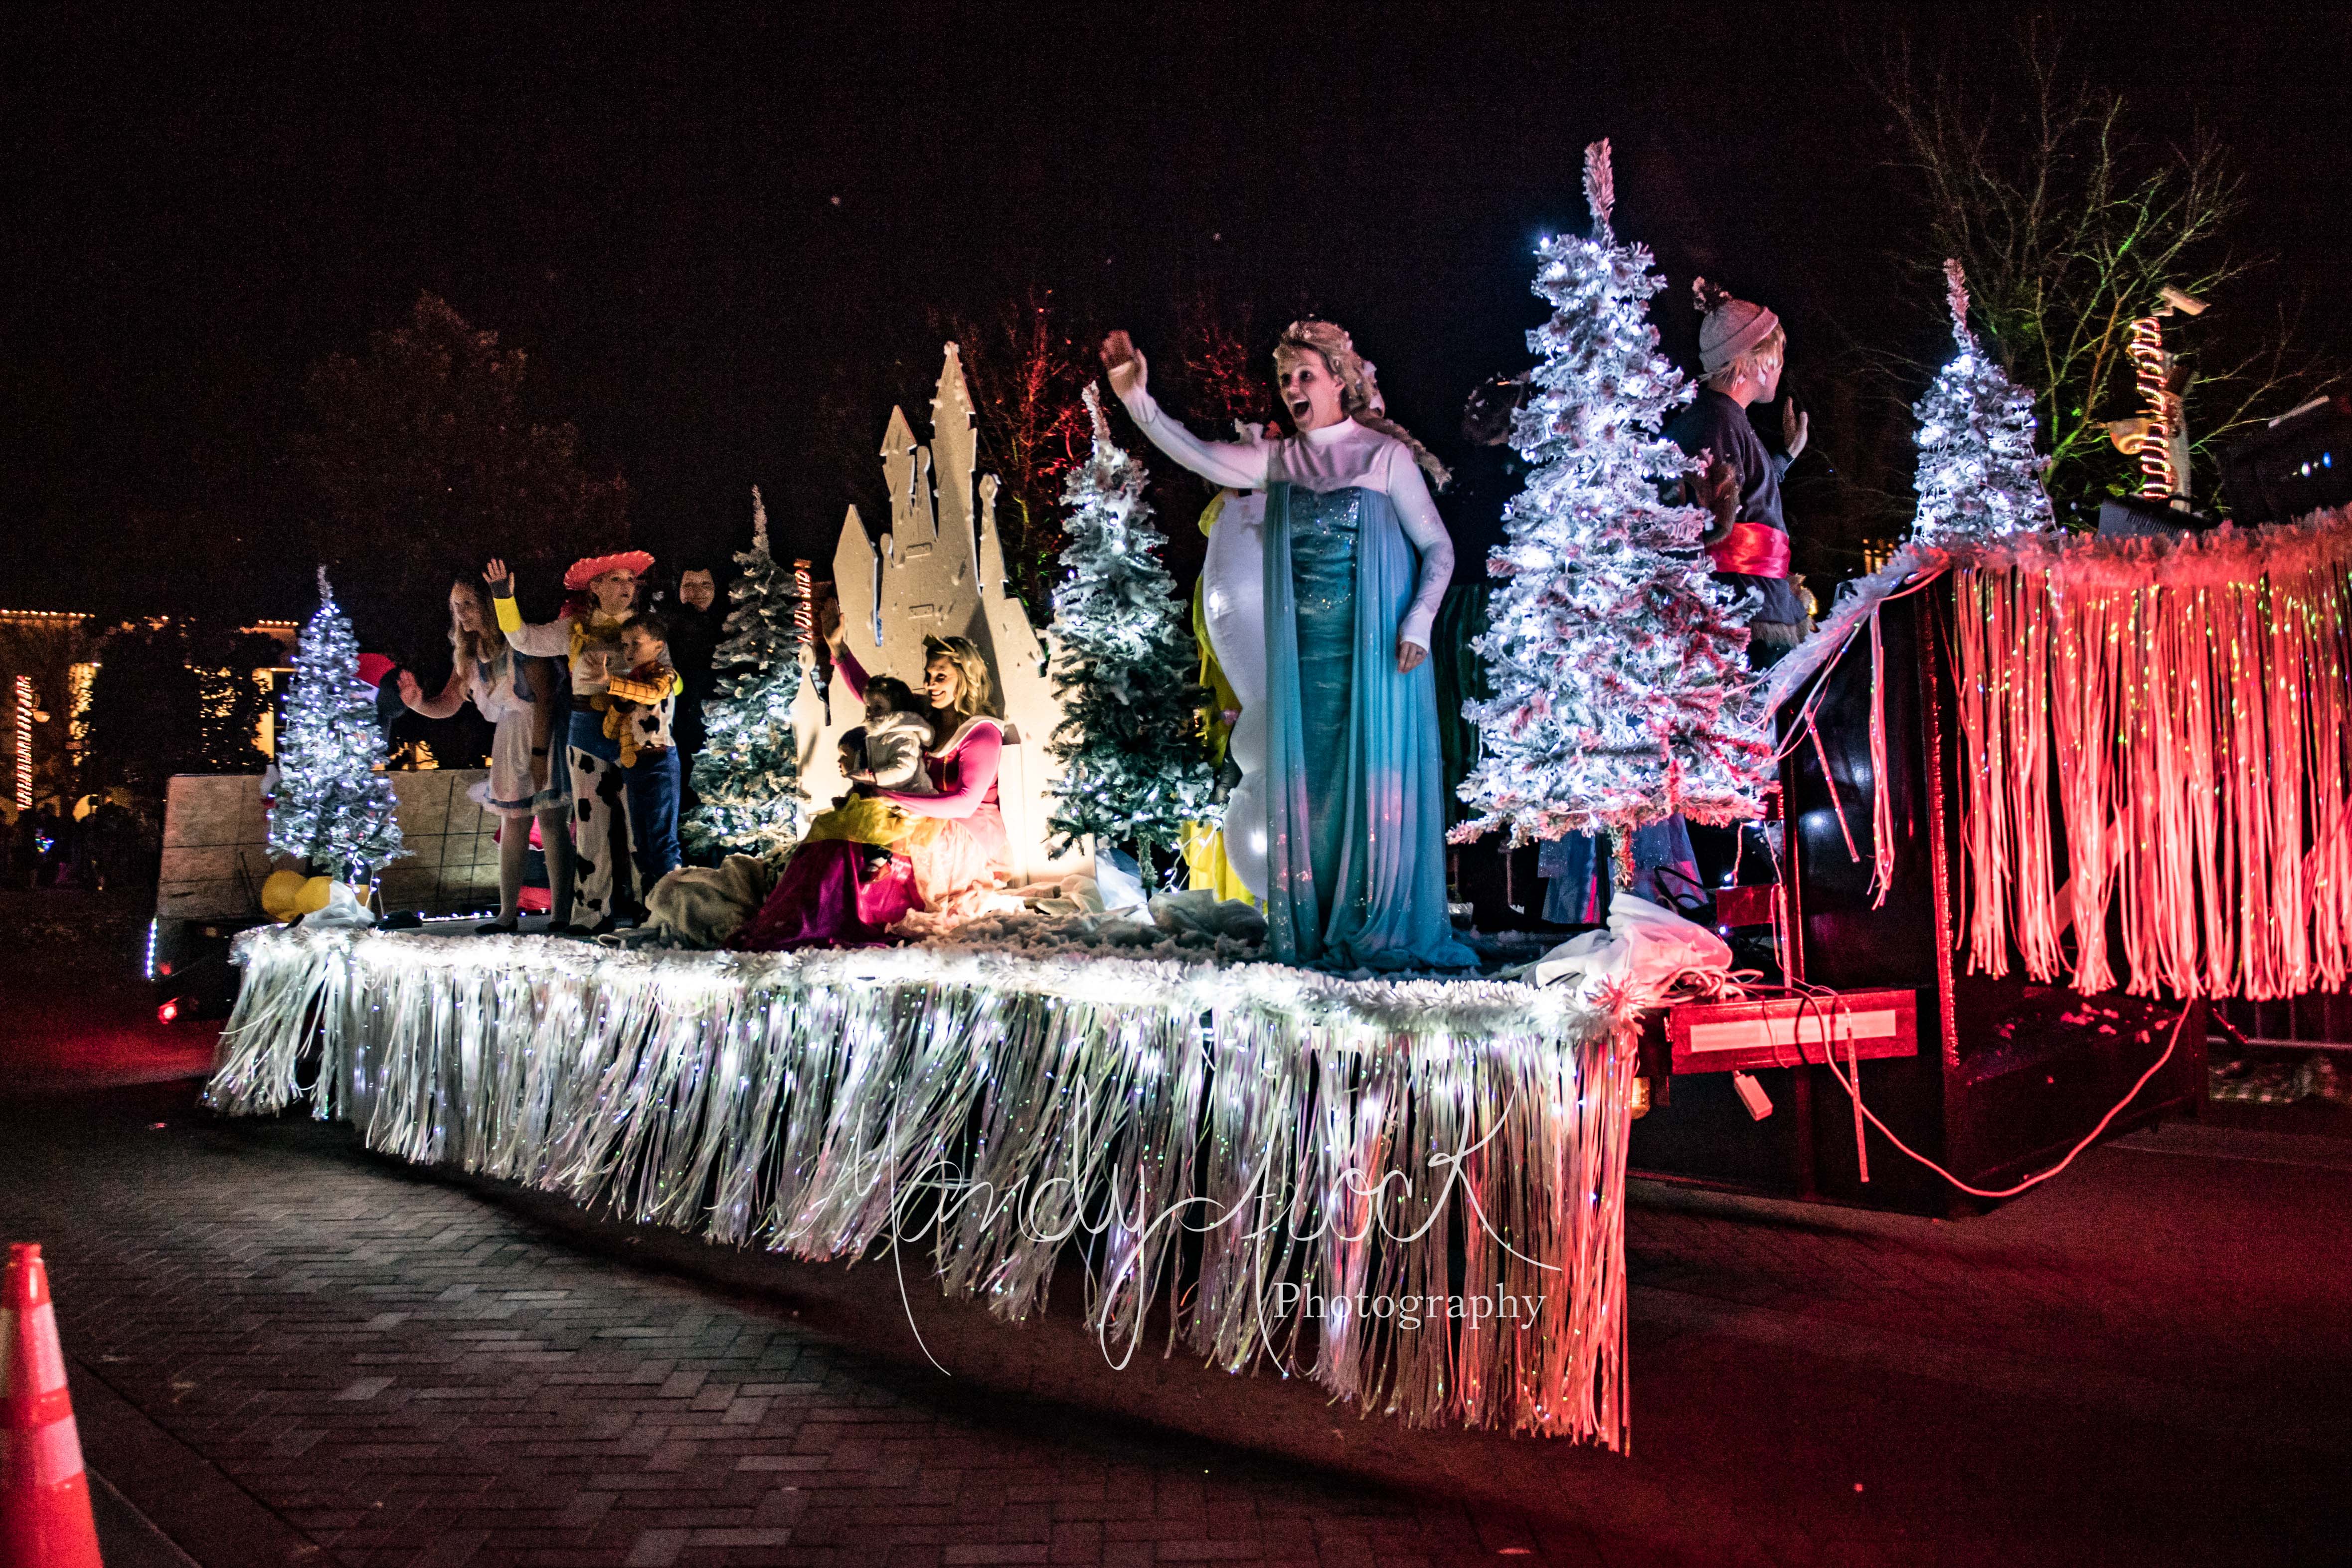 Photo’s from last weekend’s 12th Annual Lions Club Lighted Christmas Parade by Mandy Fiock Photography!